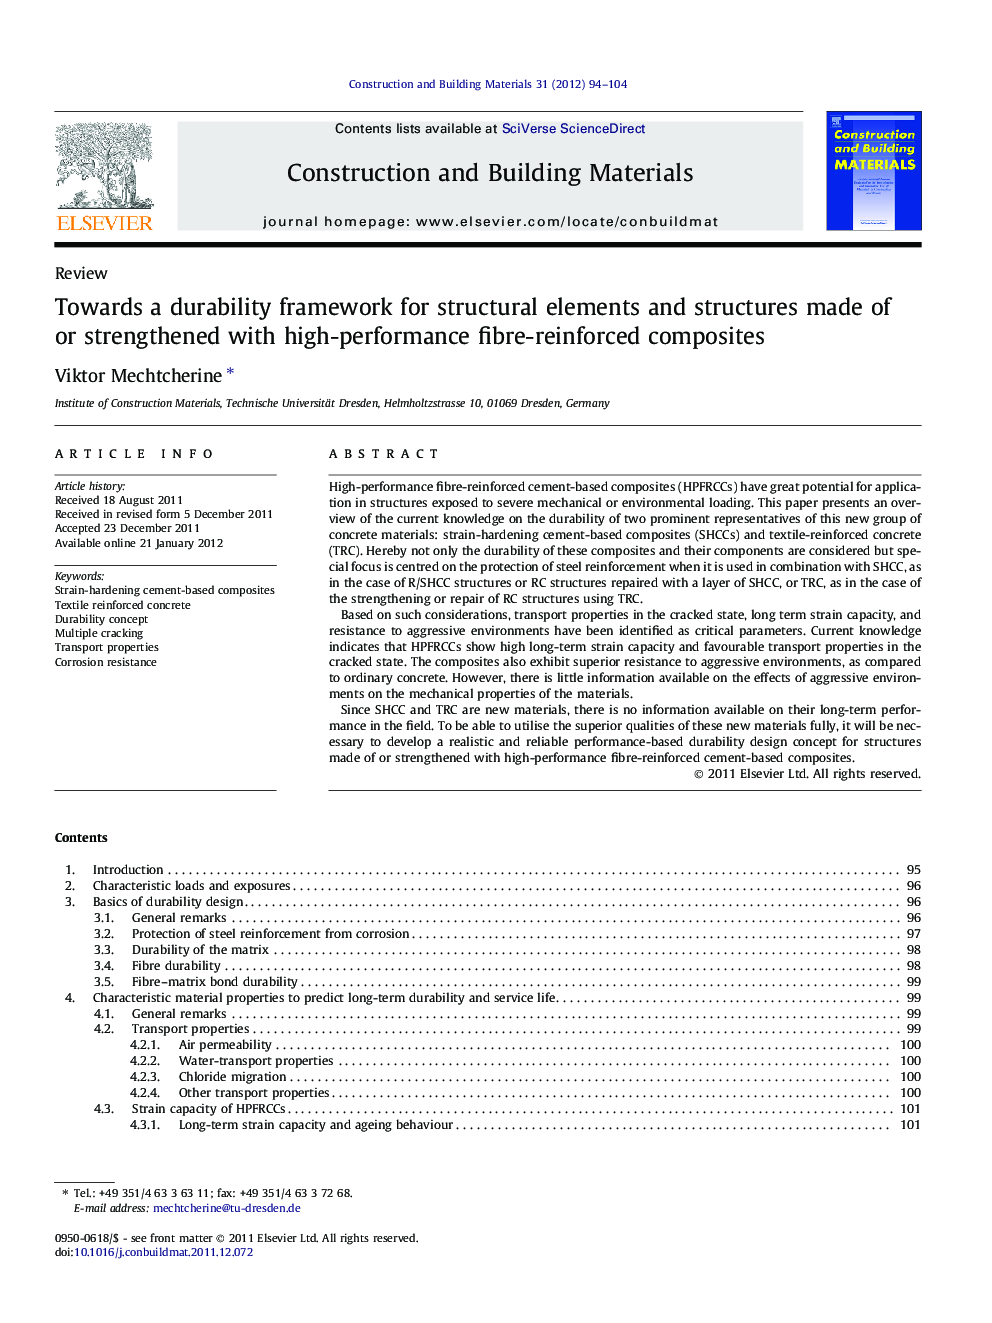 Towards a durability framework for structural elements and structures made of or strengthened with high-performance fibre-reinforced composites